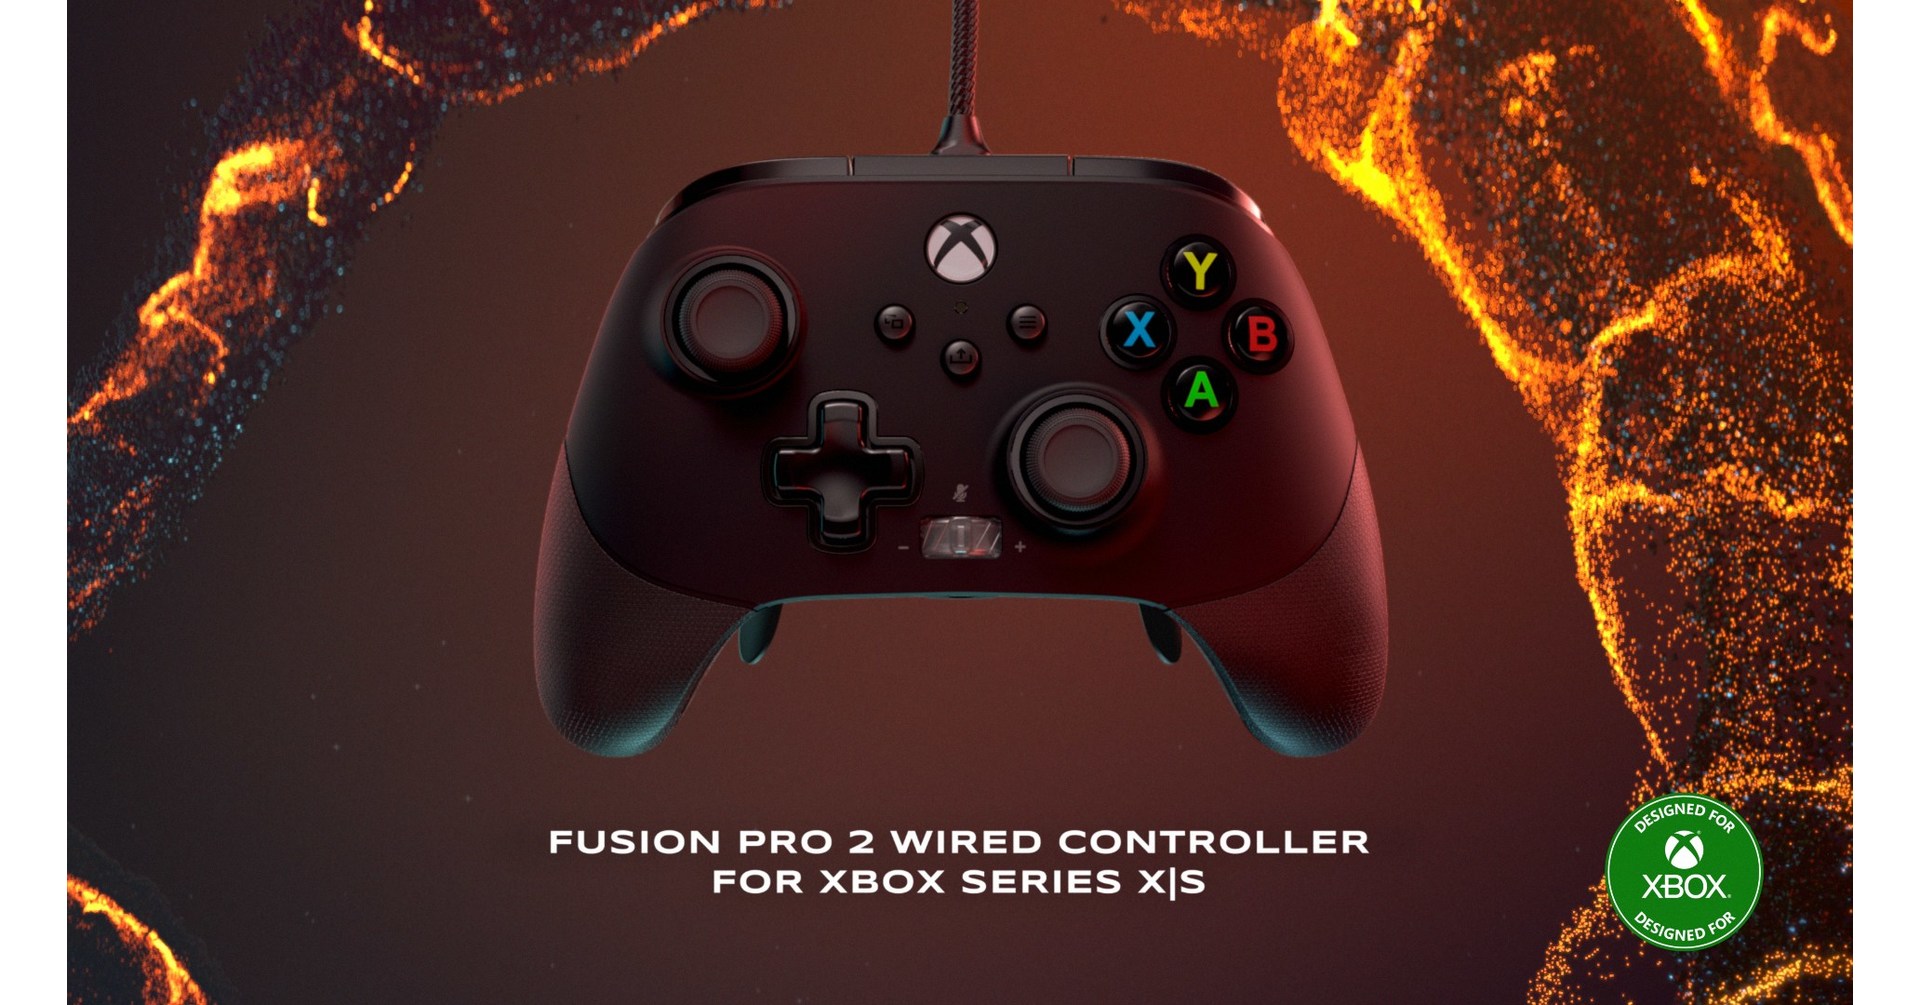 PowerA Announces the New FUSION Pro 2 Wired Controller Designed for Xbox